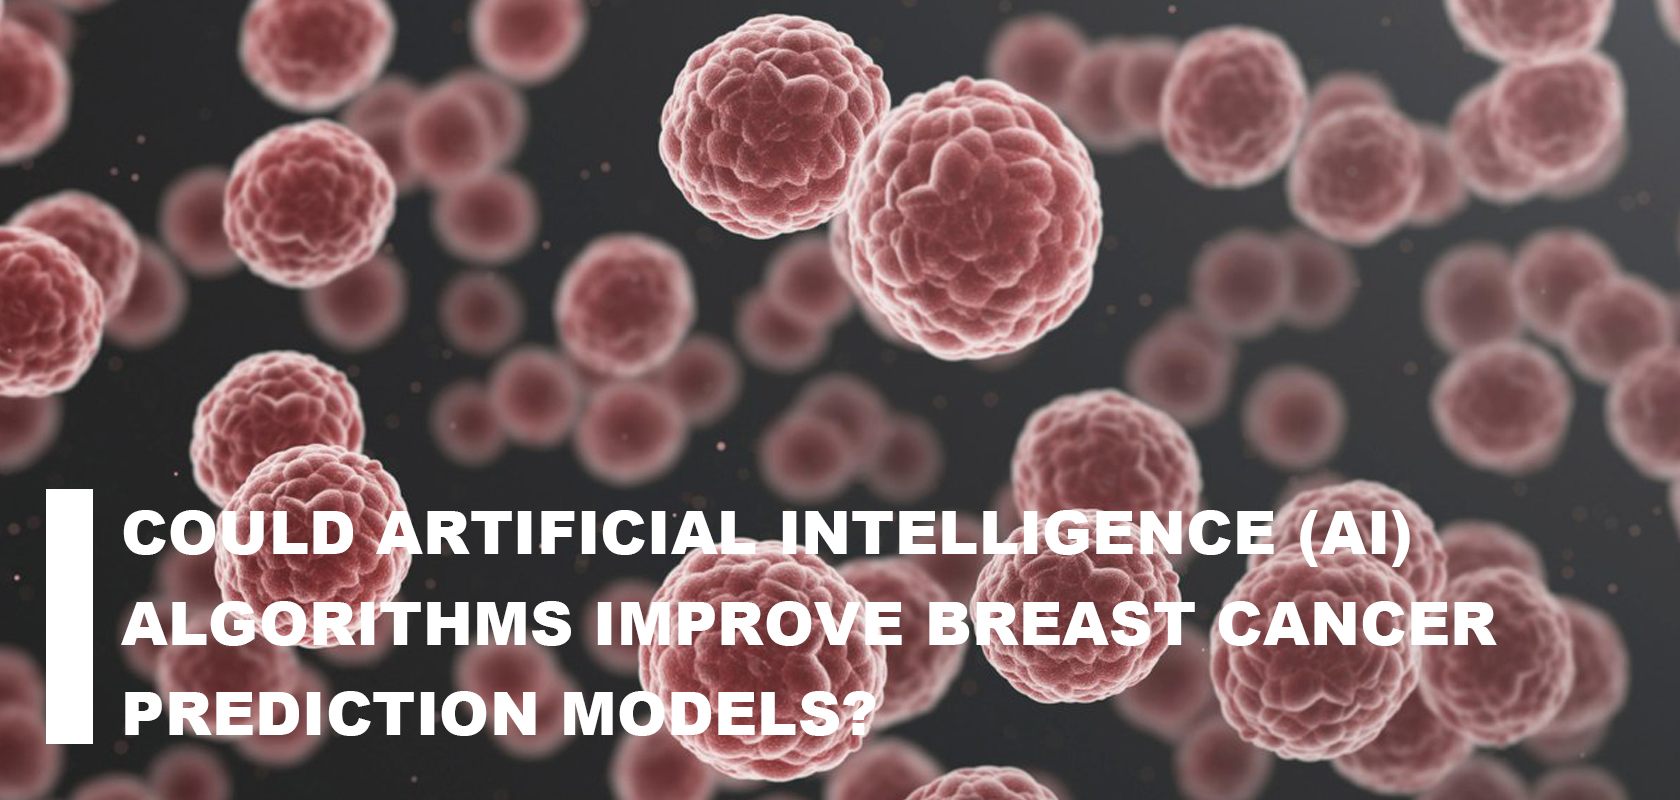 COULD ARTIFICIAL INTELLIGENCE (AI) ALGORITHMS IMPROVE BREAST CANCER PREDICTION MODELS?